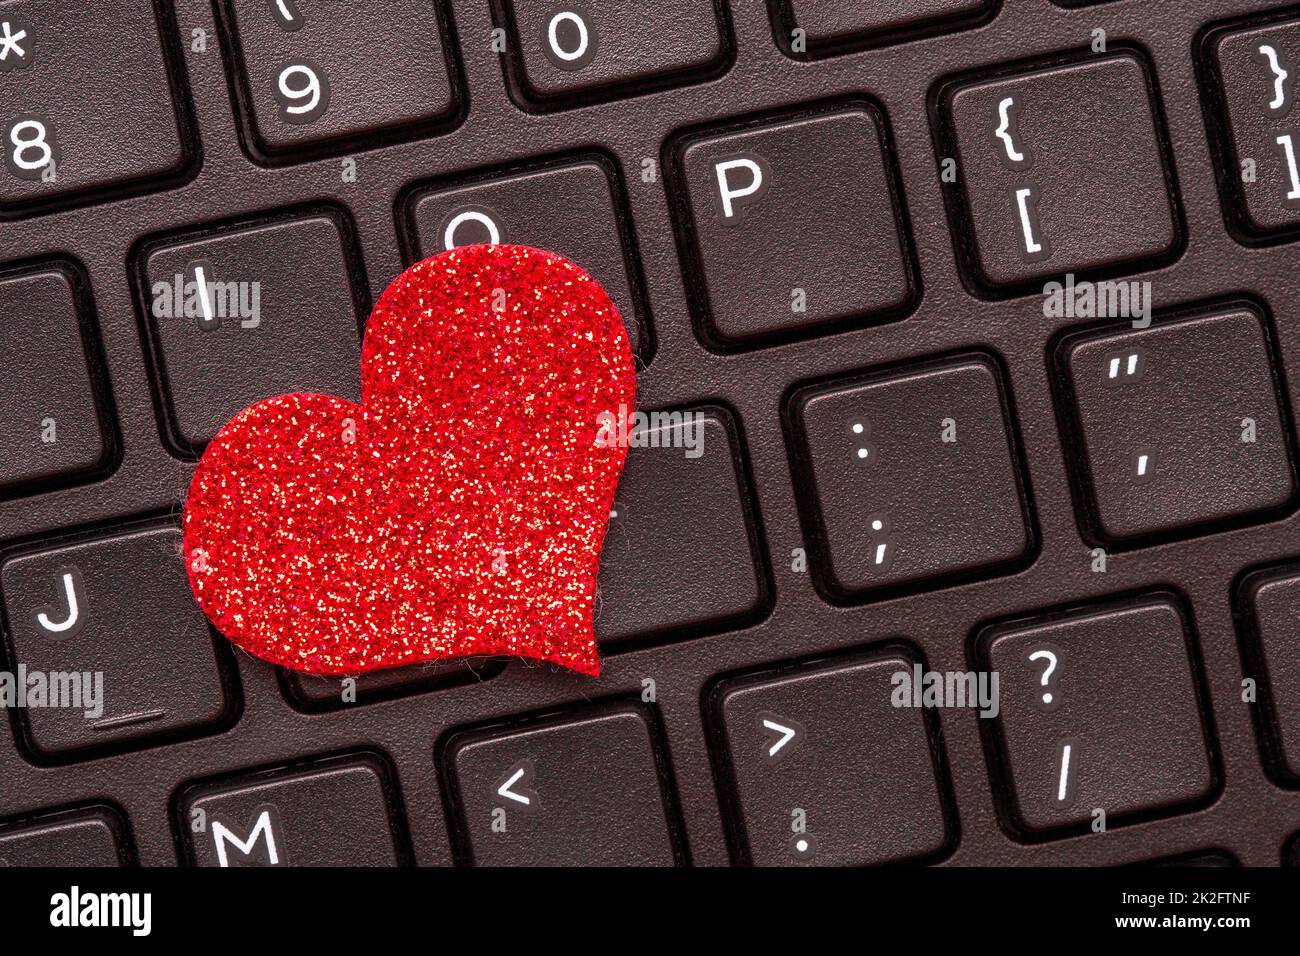 A red heart on a laptop keyboard Stock Photo